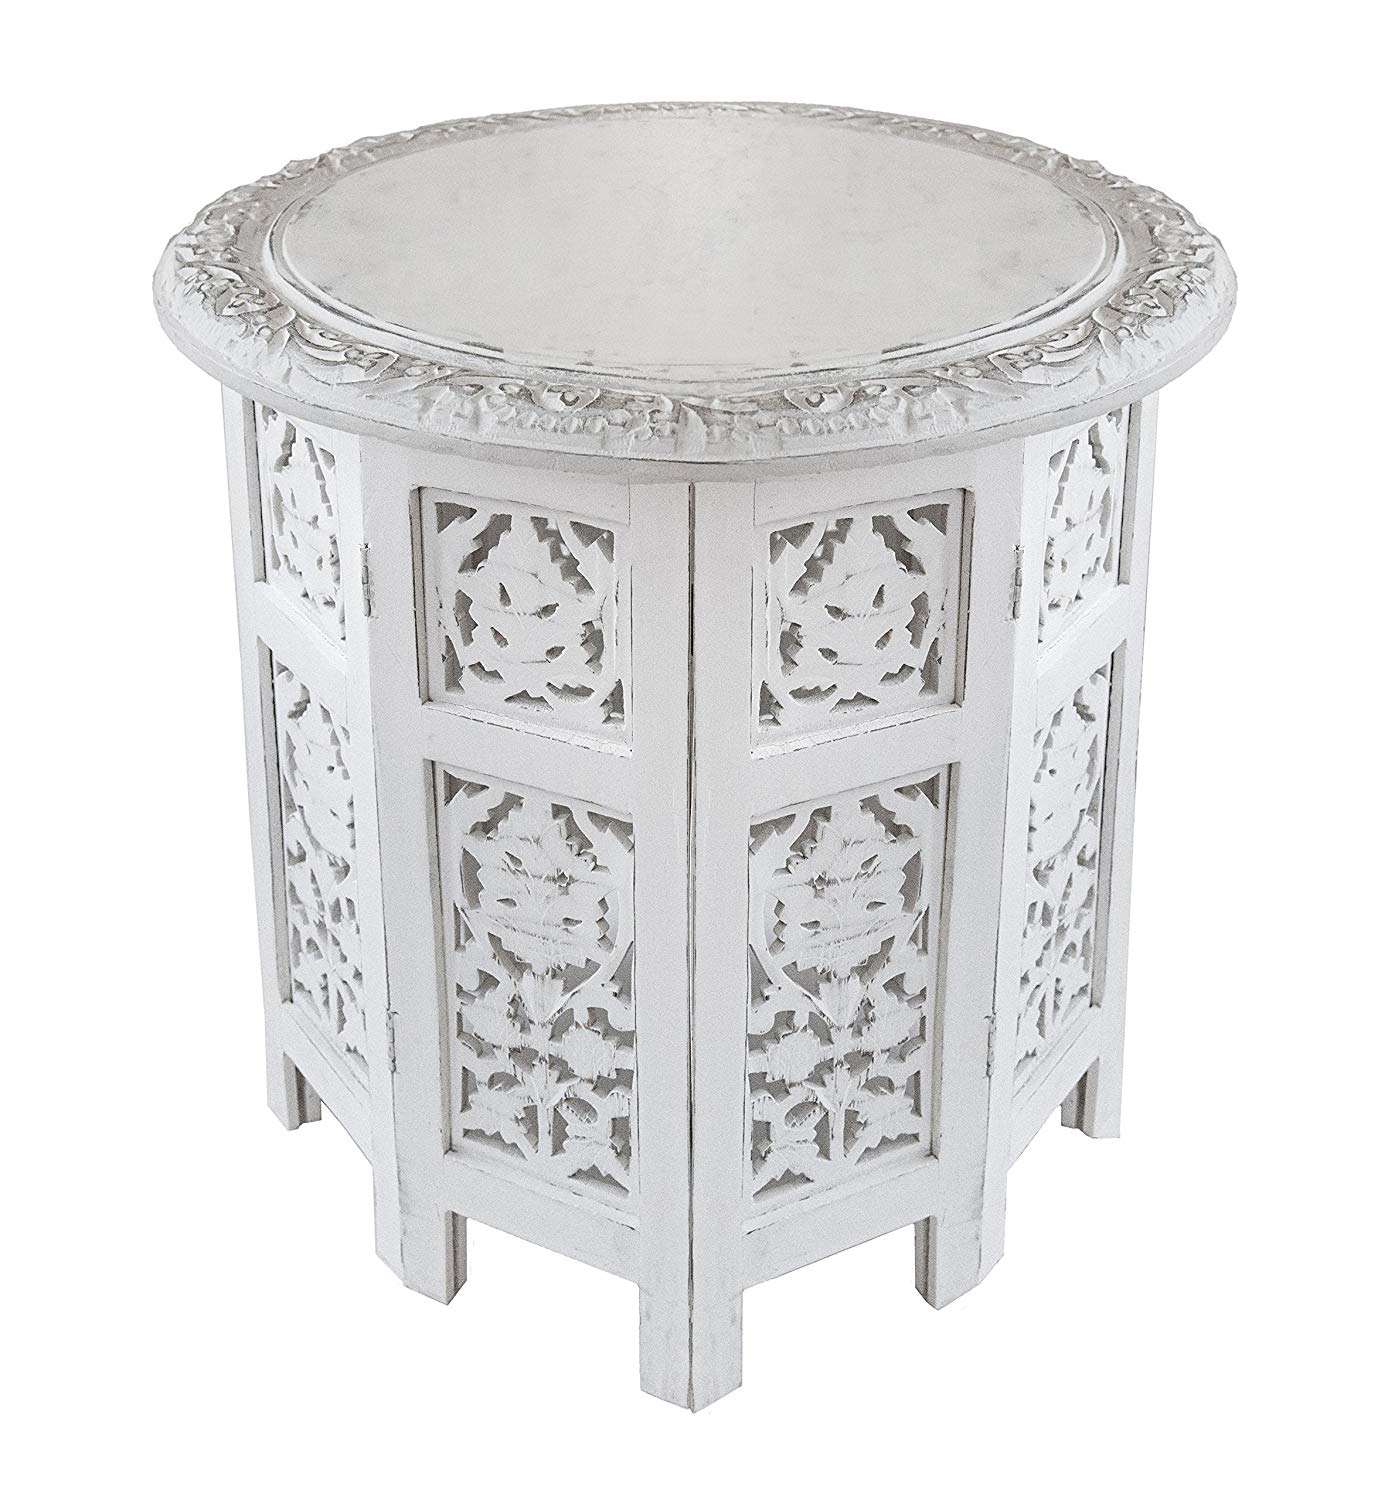 cotton craft jaipur solid wood handcrafted carved accent table mango folding coffee antique white inch round top high kitchen counter height set dresser glass bookcase rustic